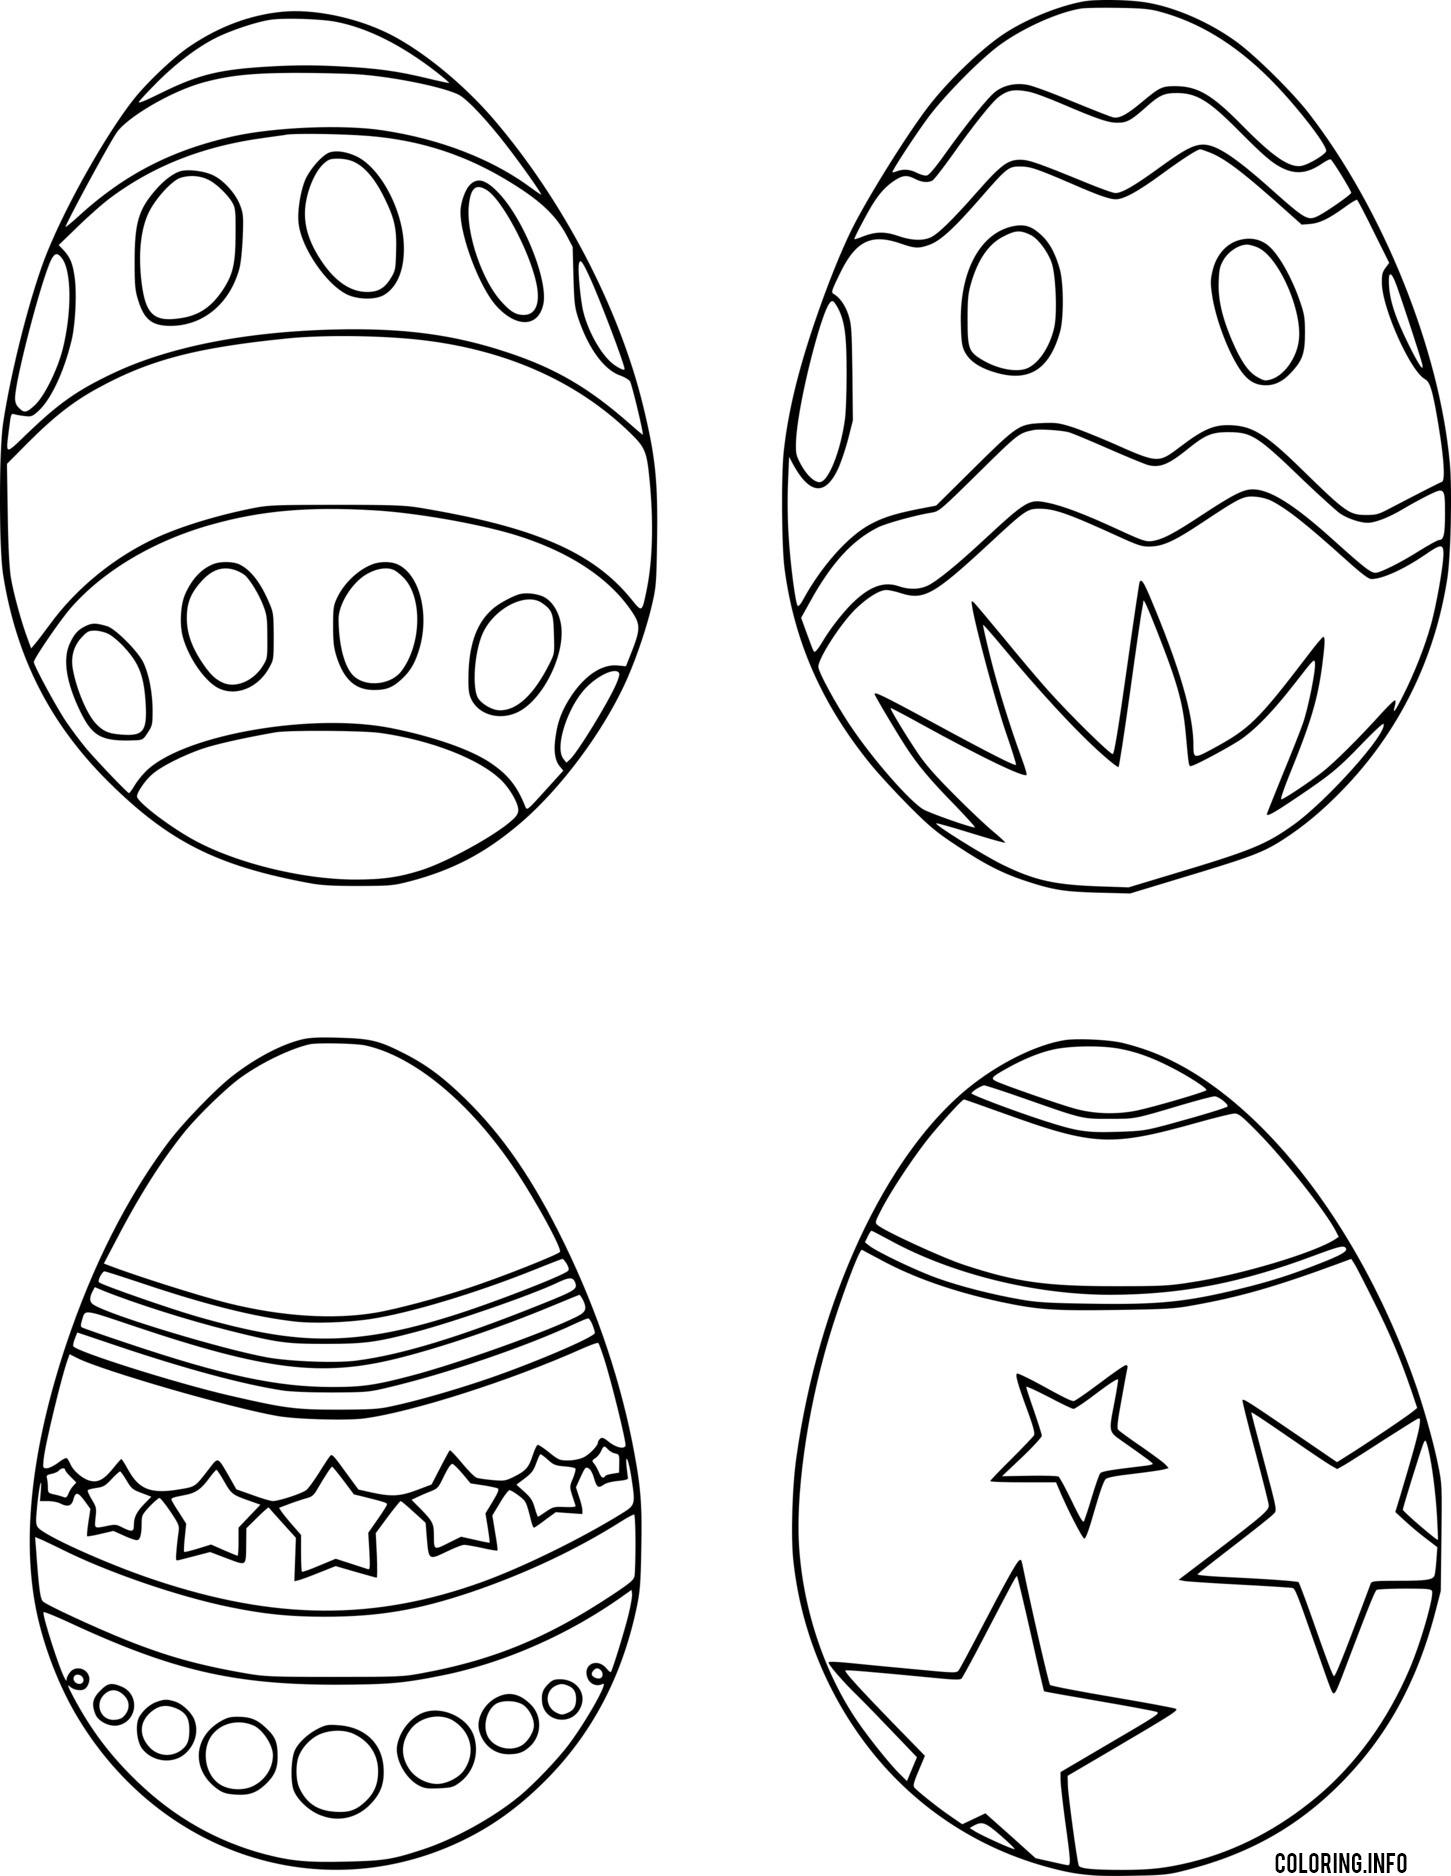 Four Easter Eggs With Various Patterns coloring